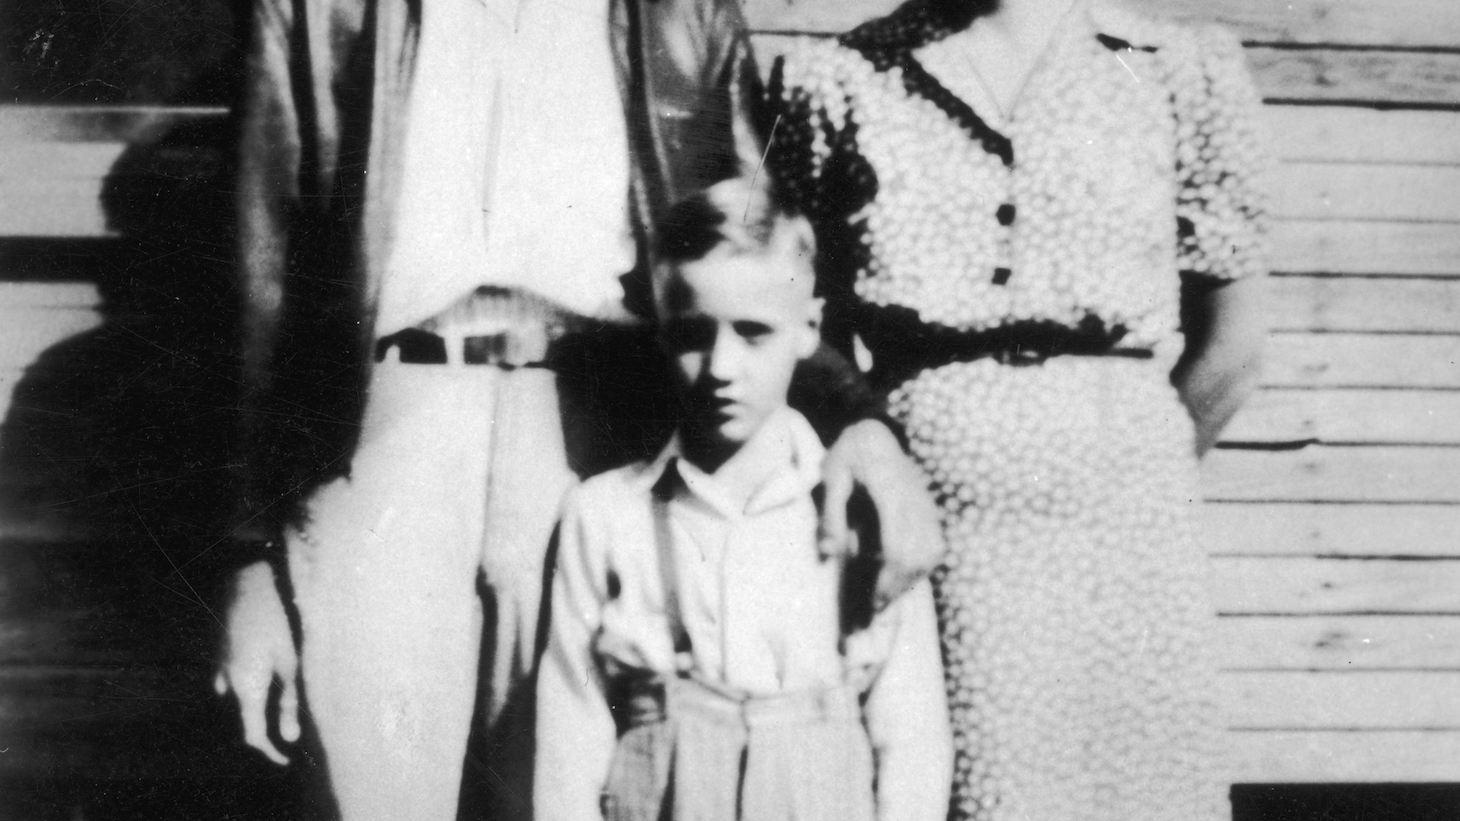 circa 1945: Elvis Presley (1935 - 1977) standing between his parents outside of their home in Tupelo, Mississippi. (Photo by Hulton Archive/Getty Images)